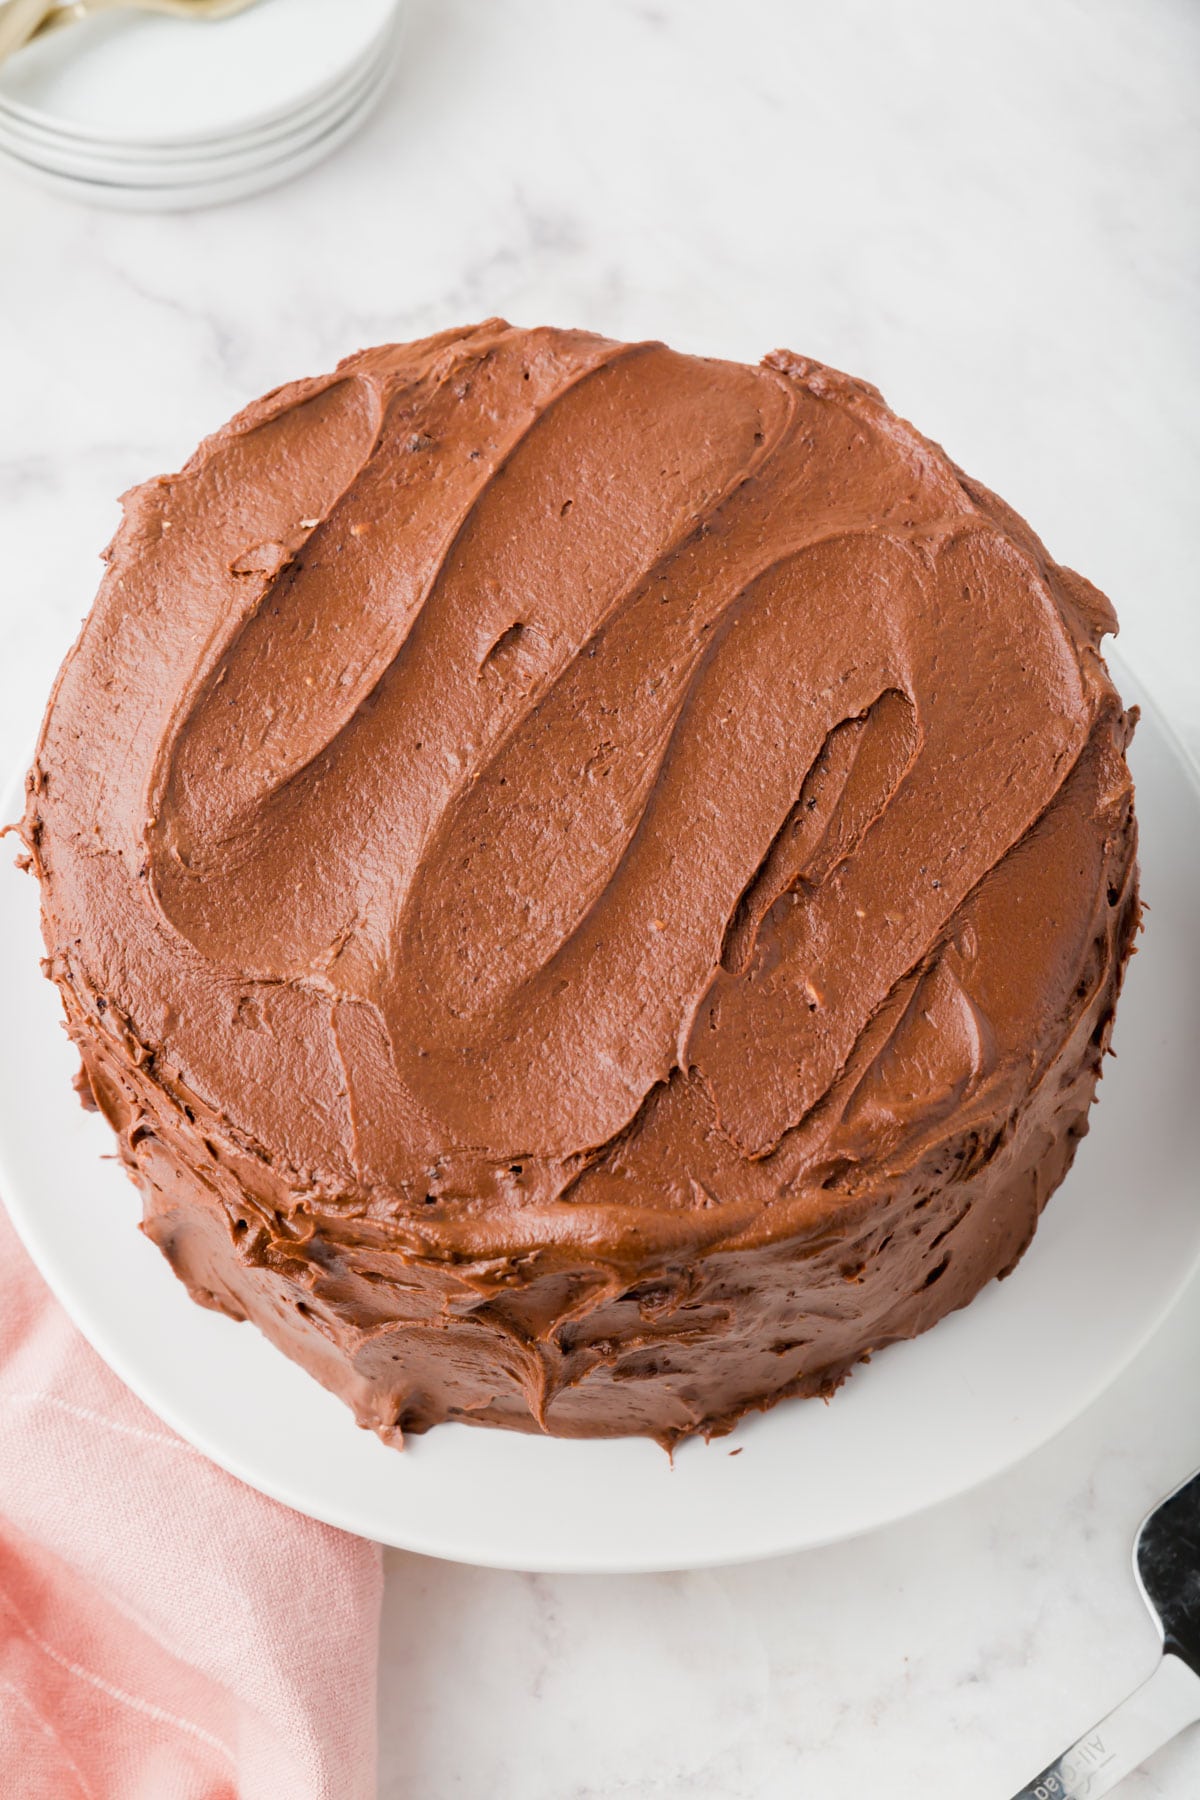 A gluten-free chocolate cake with chocolate frosting on a cake stand.